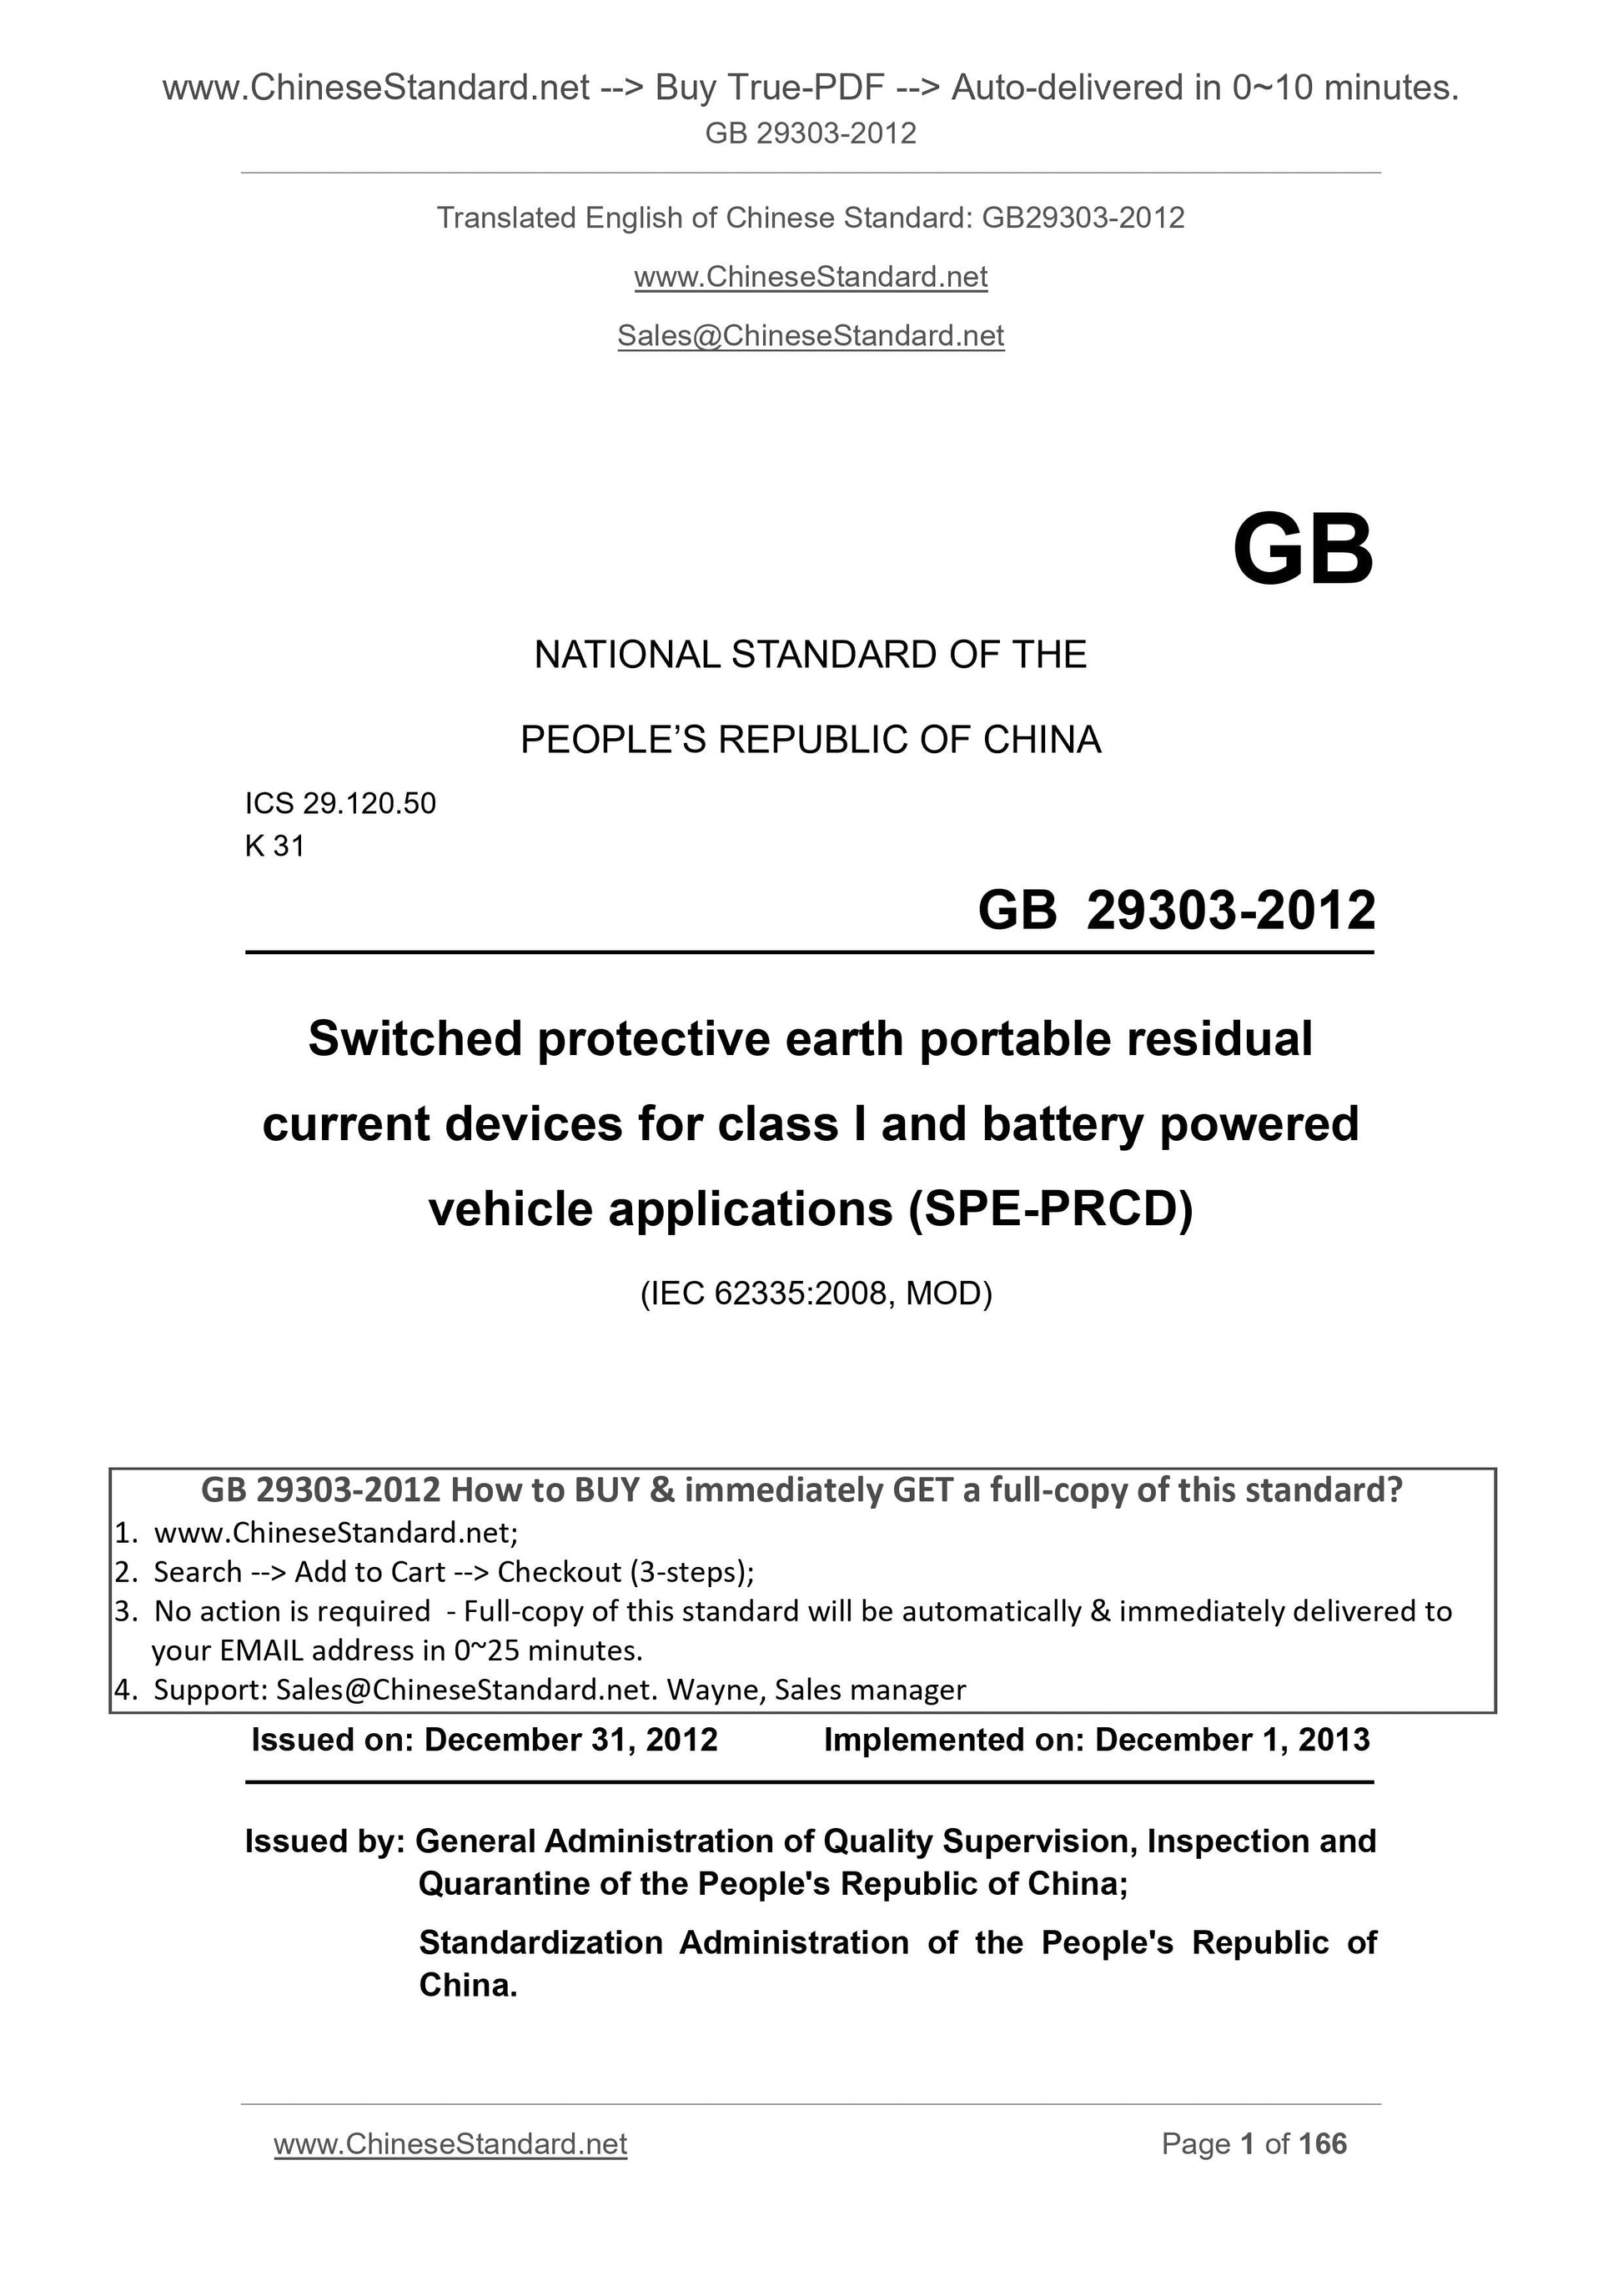 GB 29303-2012 Page 1